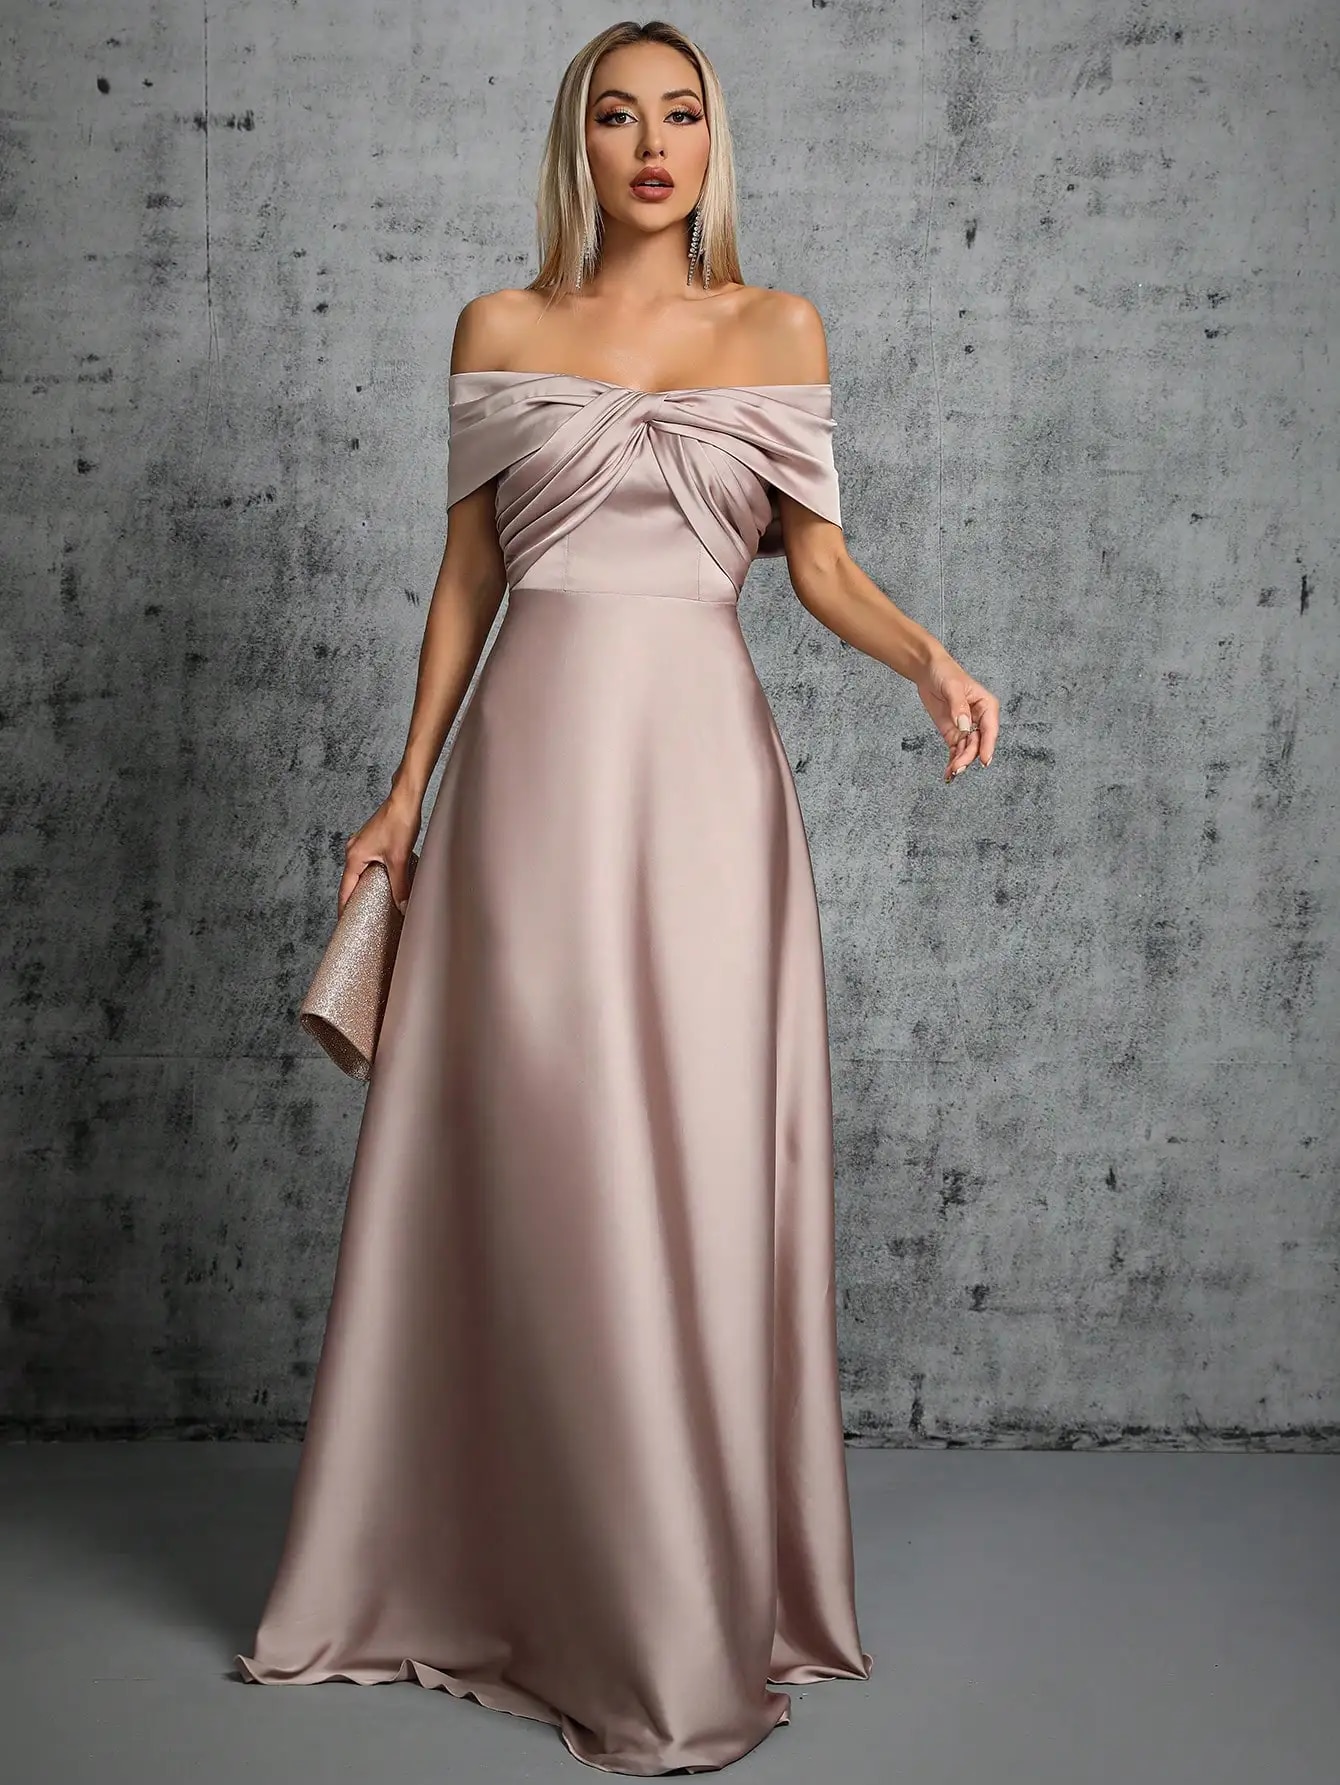 come4buy.com-Irregular Cross Pleated Satin Gown Ball Dress Party Dress